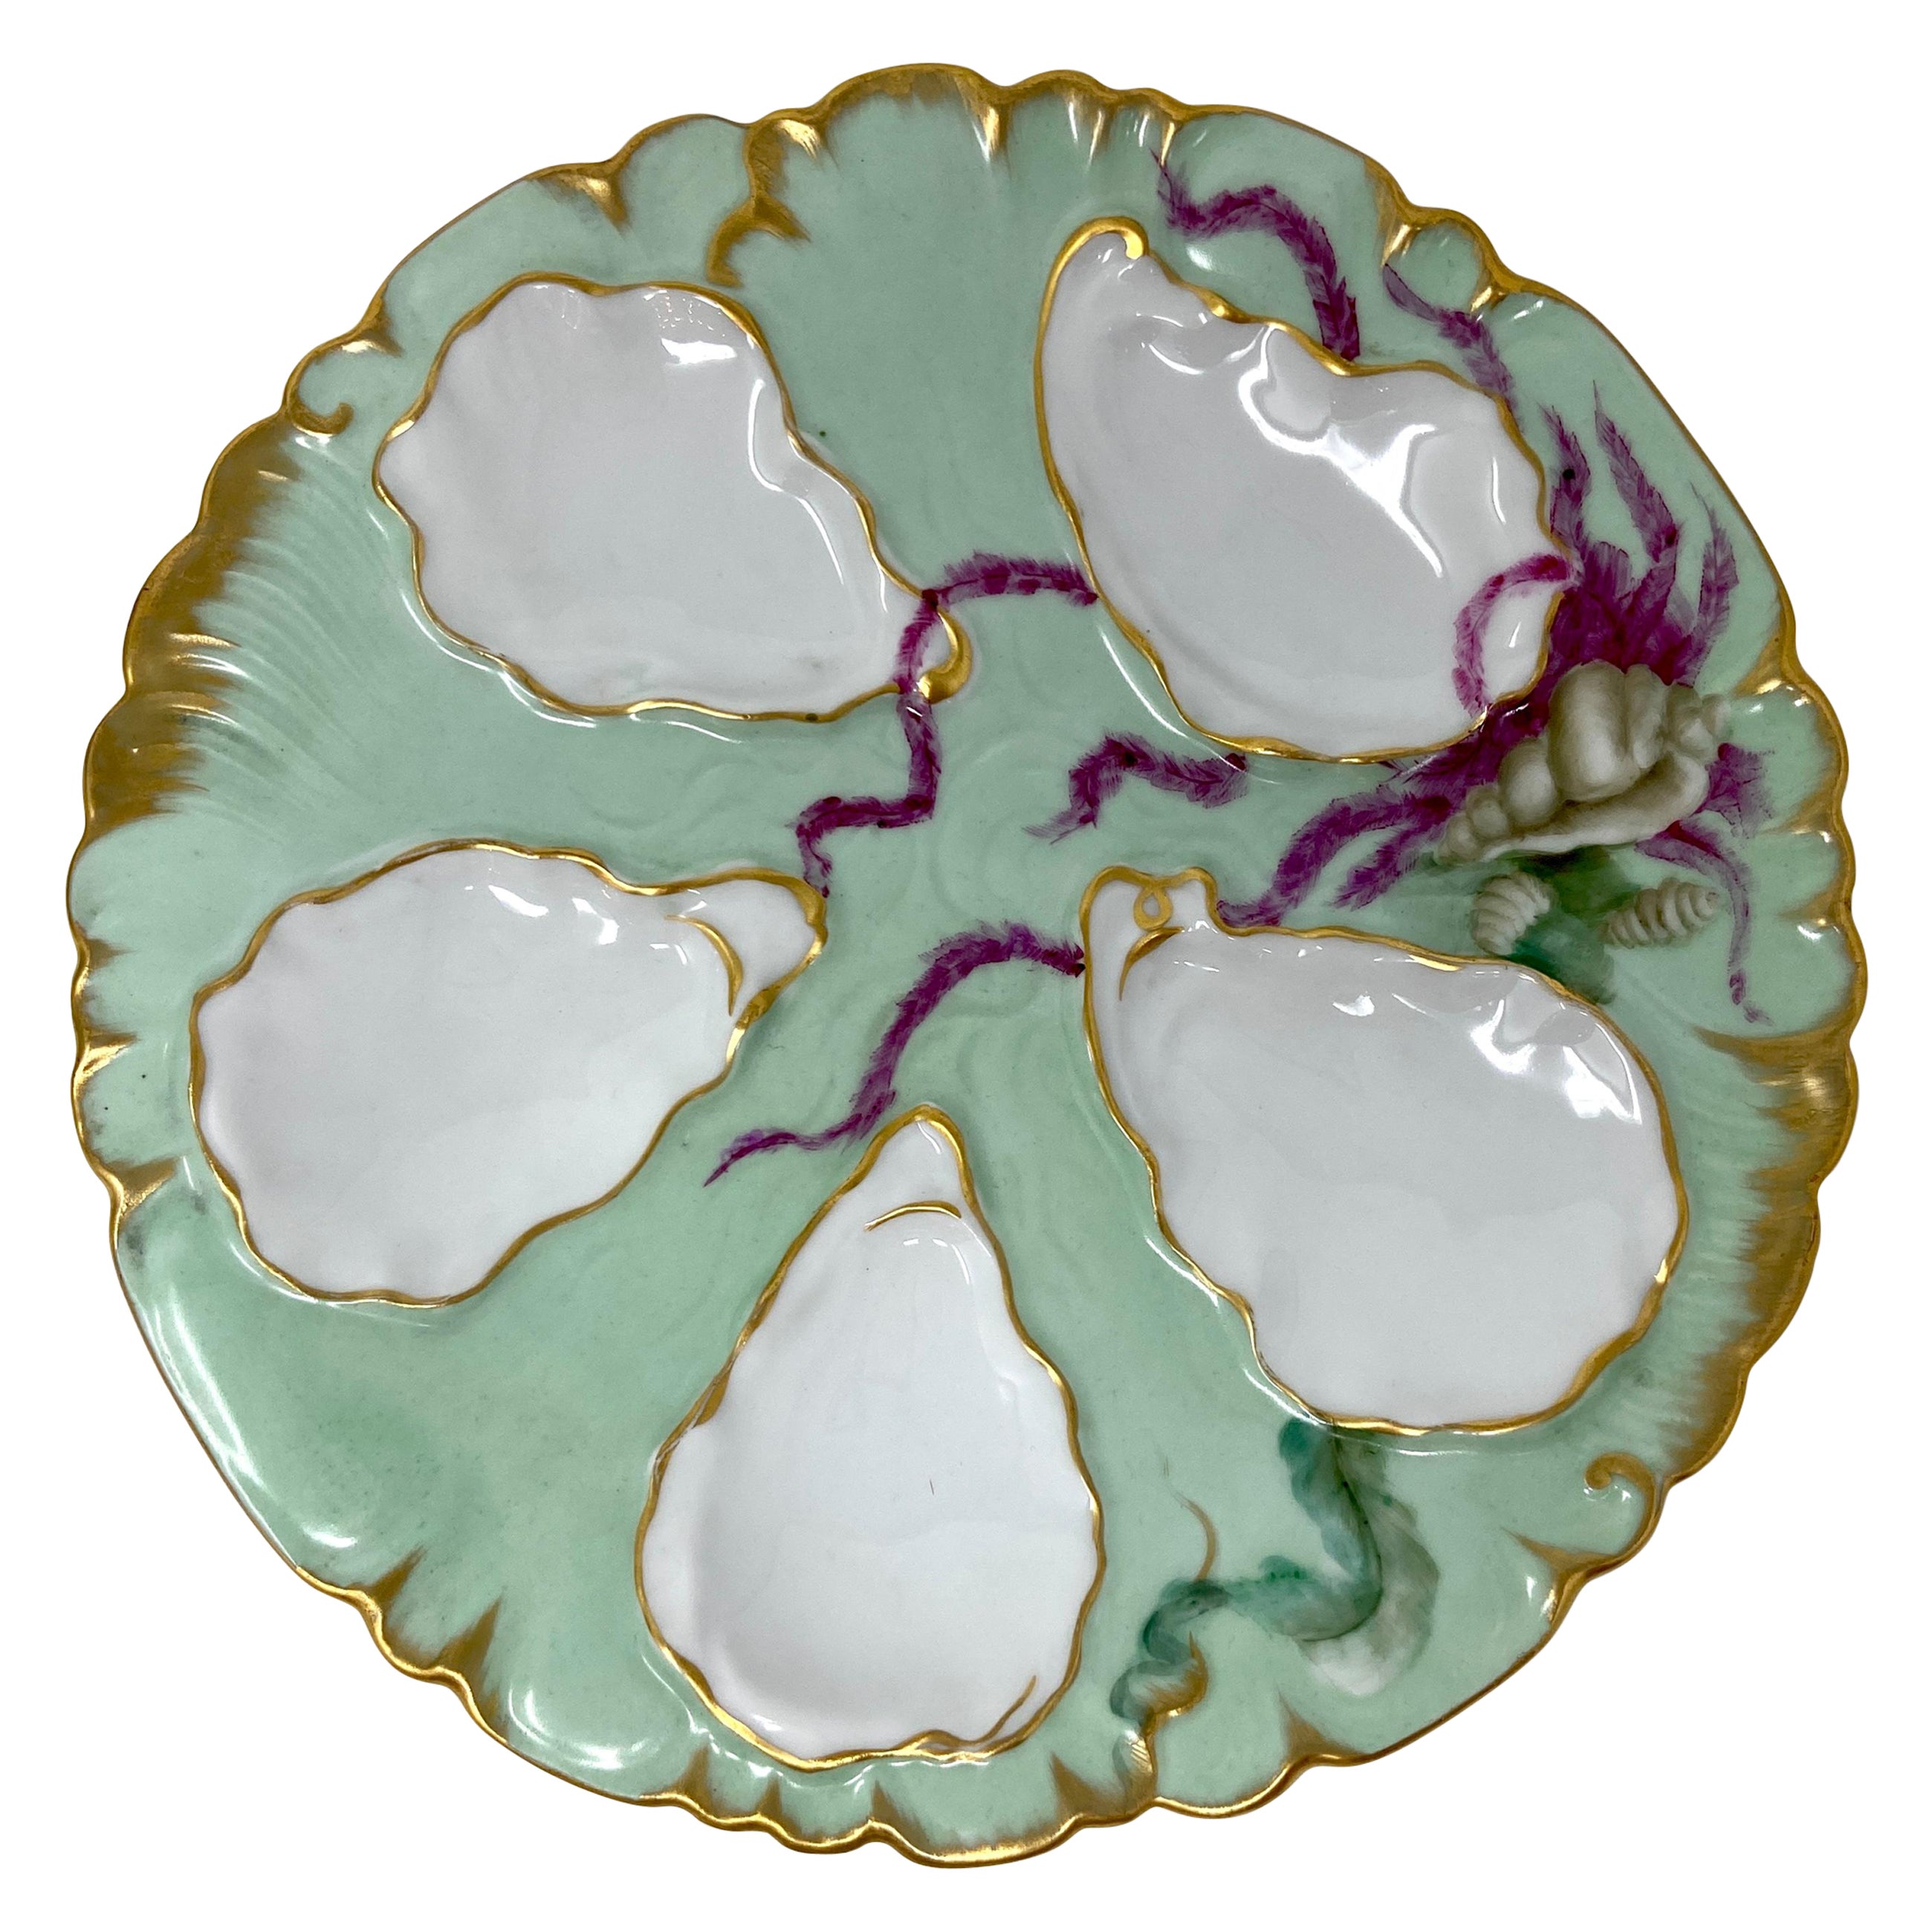 Antique French "C.F.H, Limoges" Porcelain Sea Life Oyster Plate, circa 1880